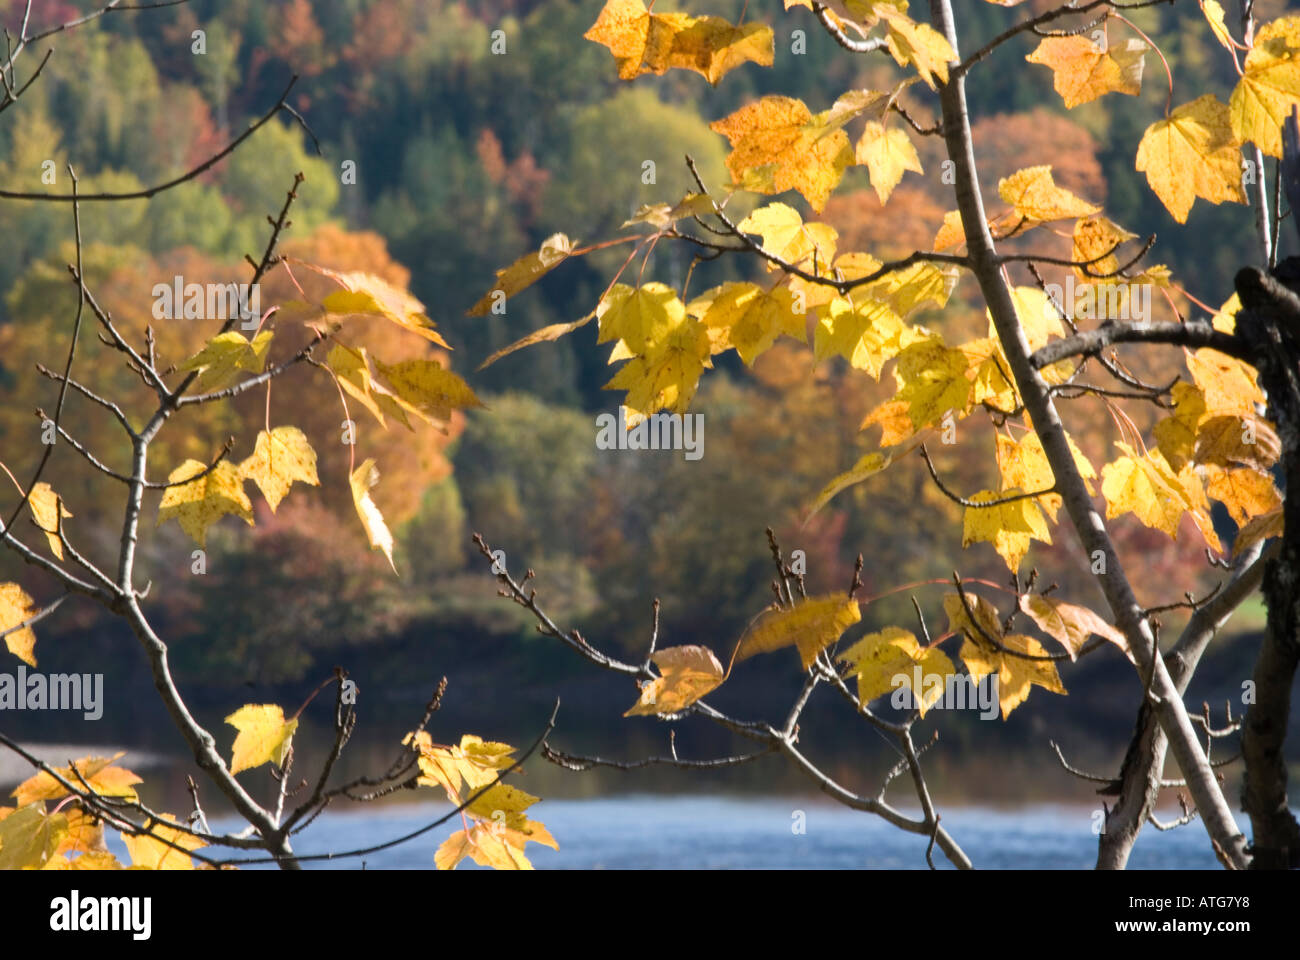 Stock image of hardwoods with bright red maples in full fall colours at the rivers edge in New Brunswick Canada Stock Photo